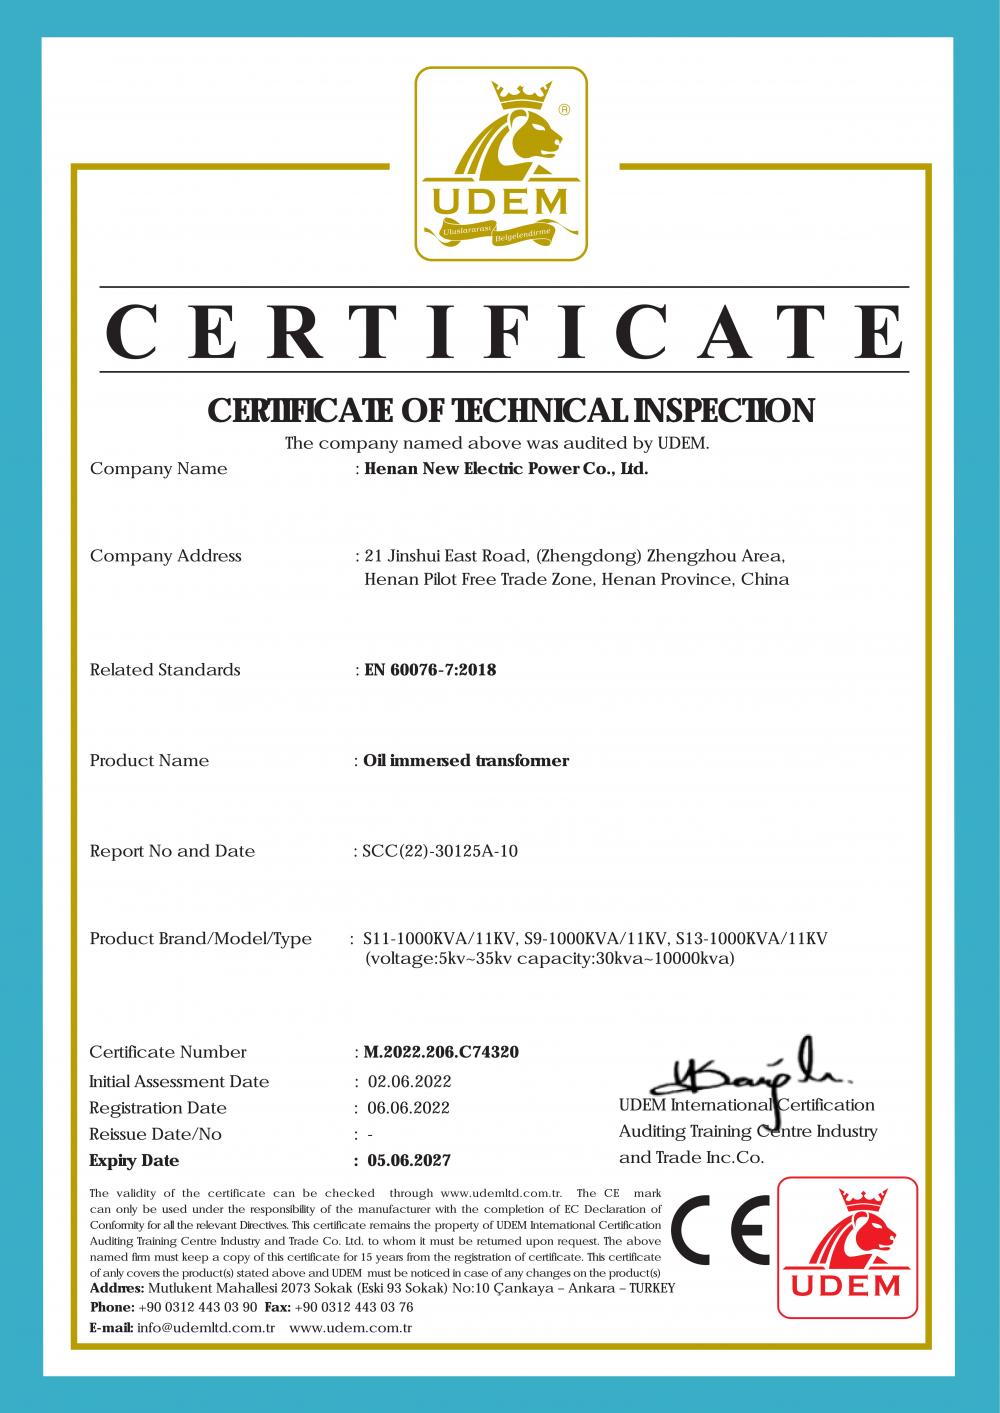 CERTIFICATE OF TECHNICALINSPECTION